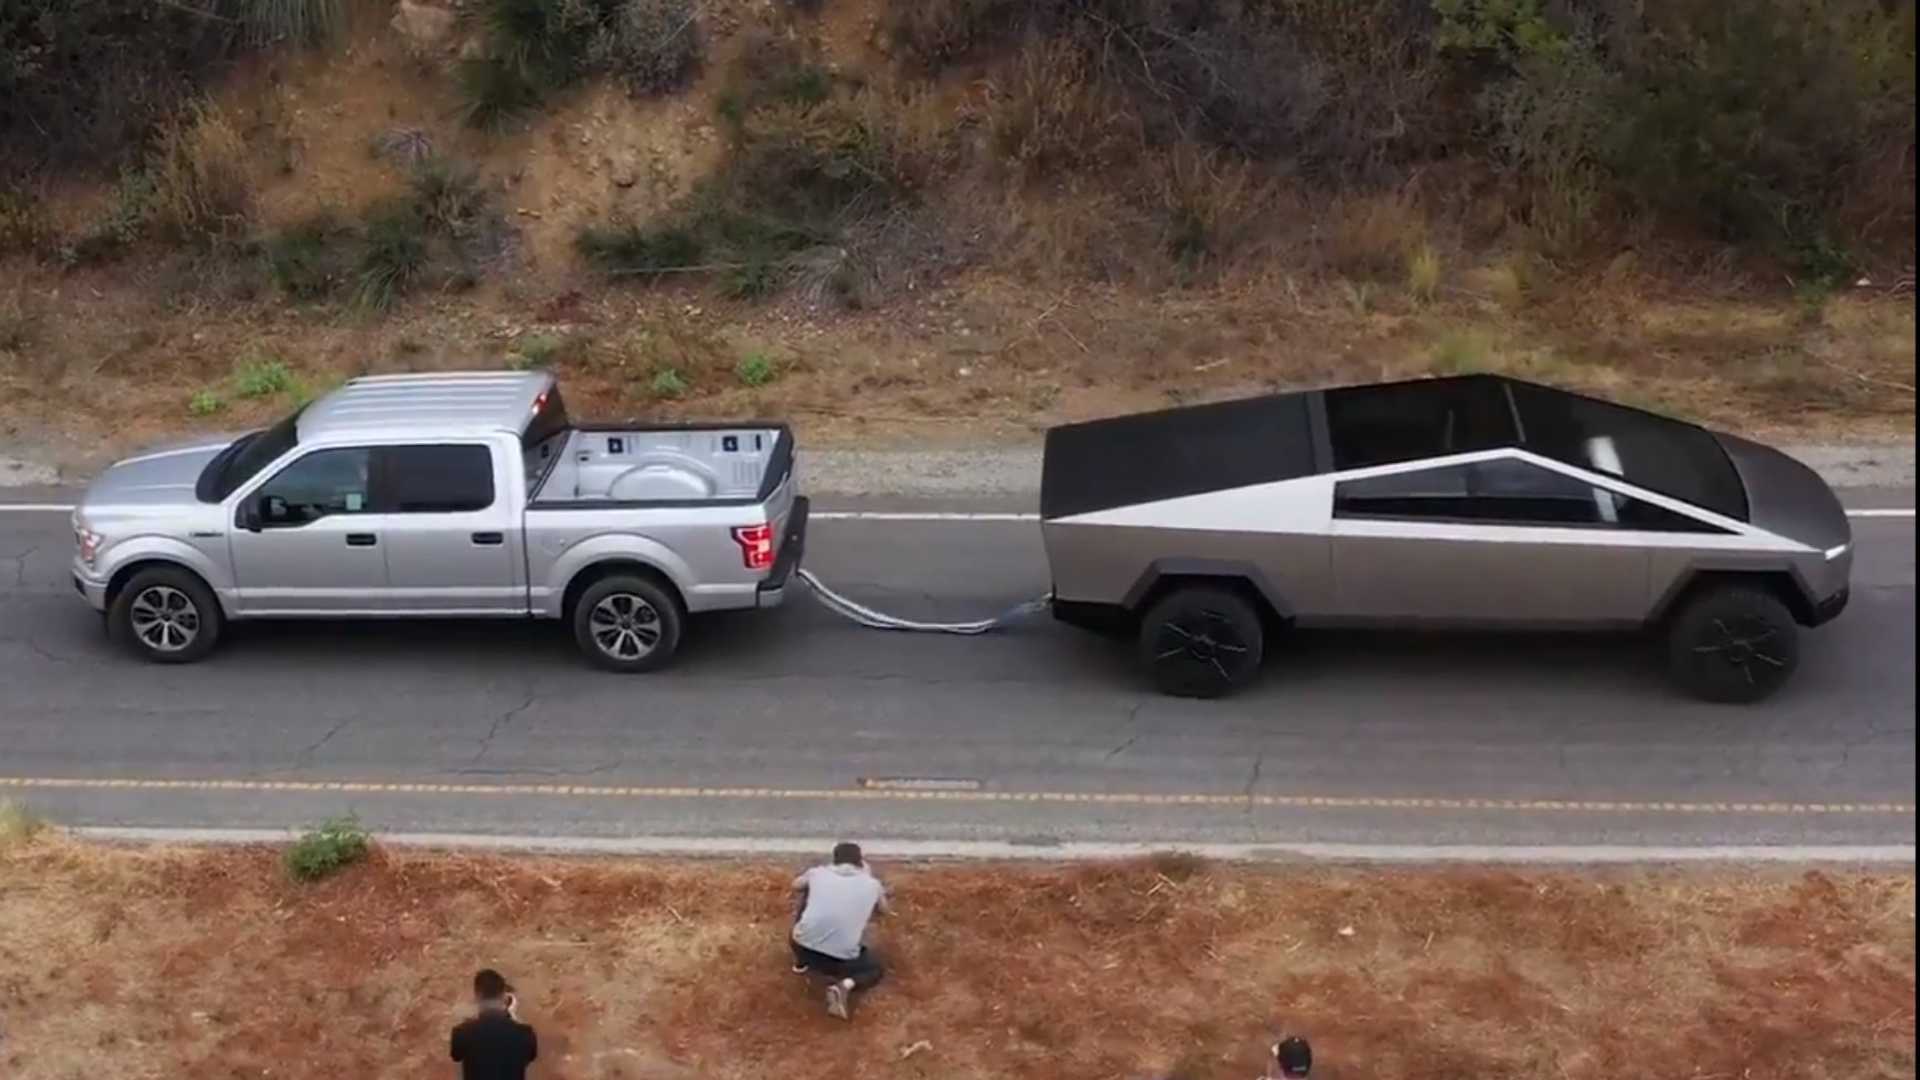 Tesla Cybertruck Tug Of War With Ford F 150 Shown In Better